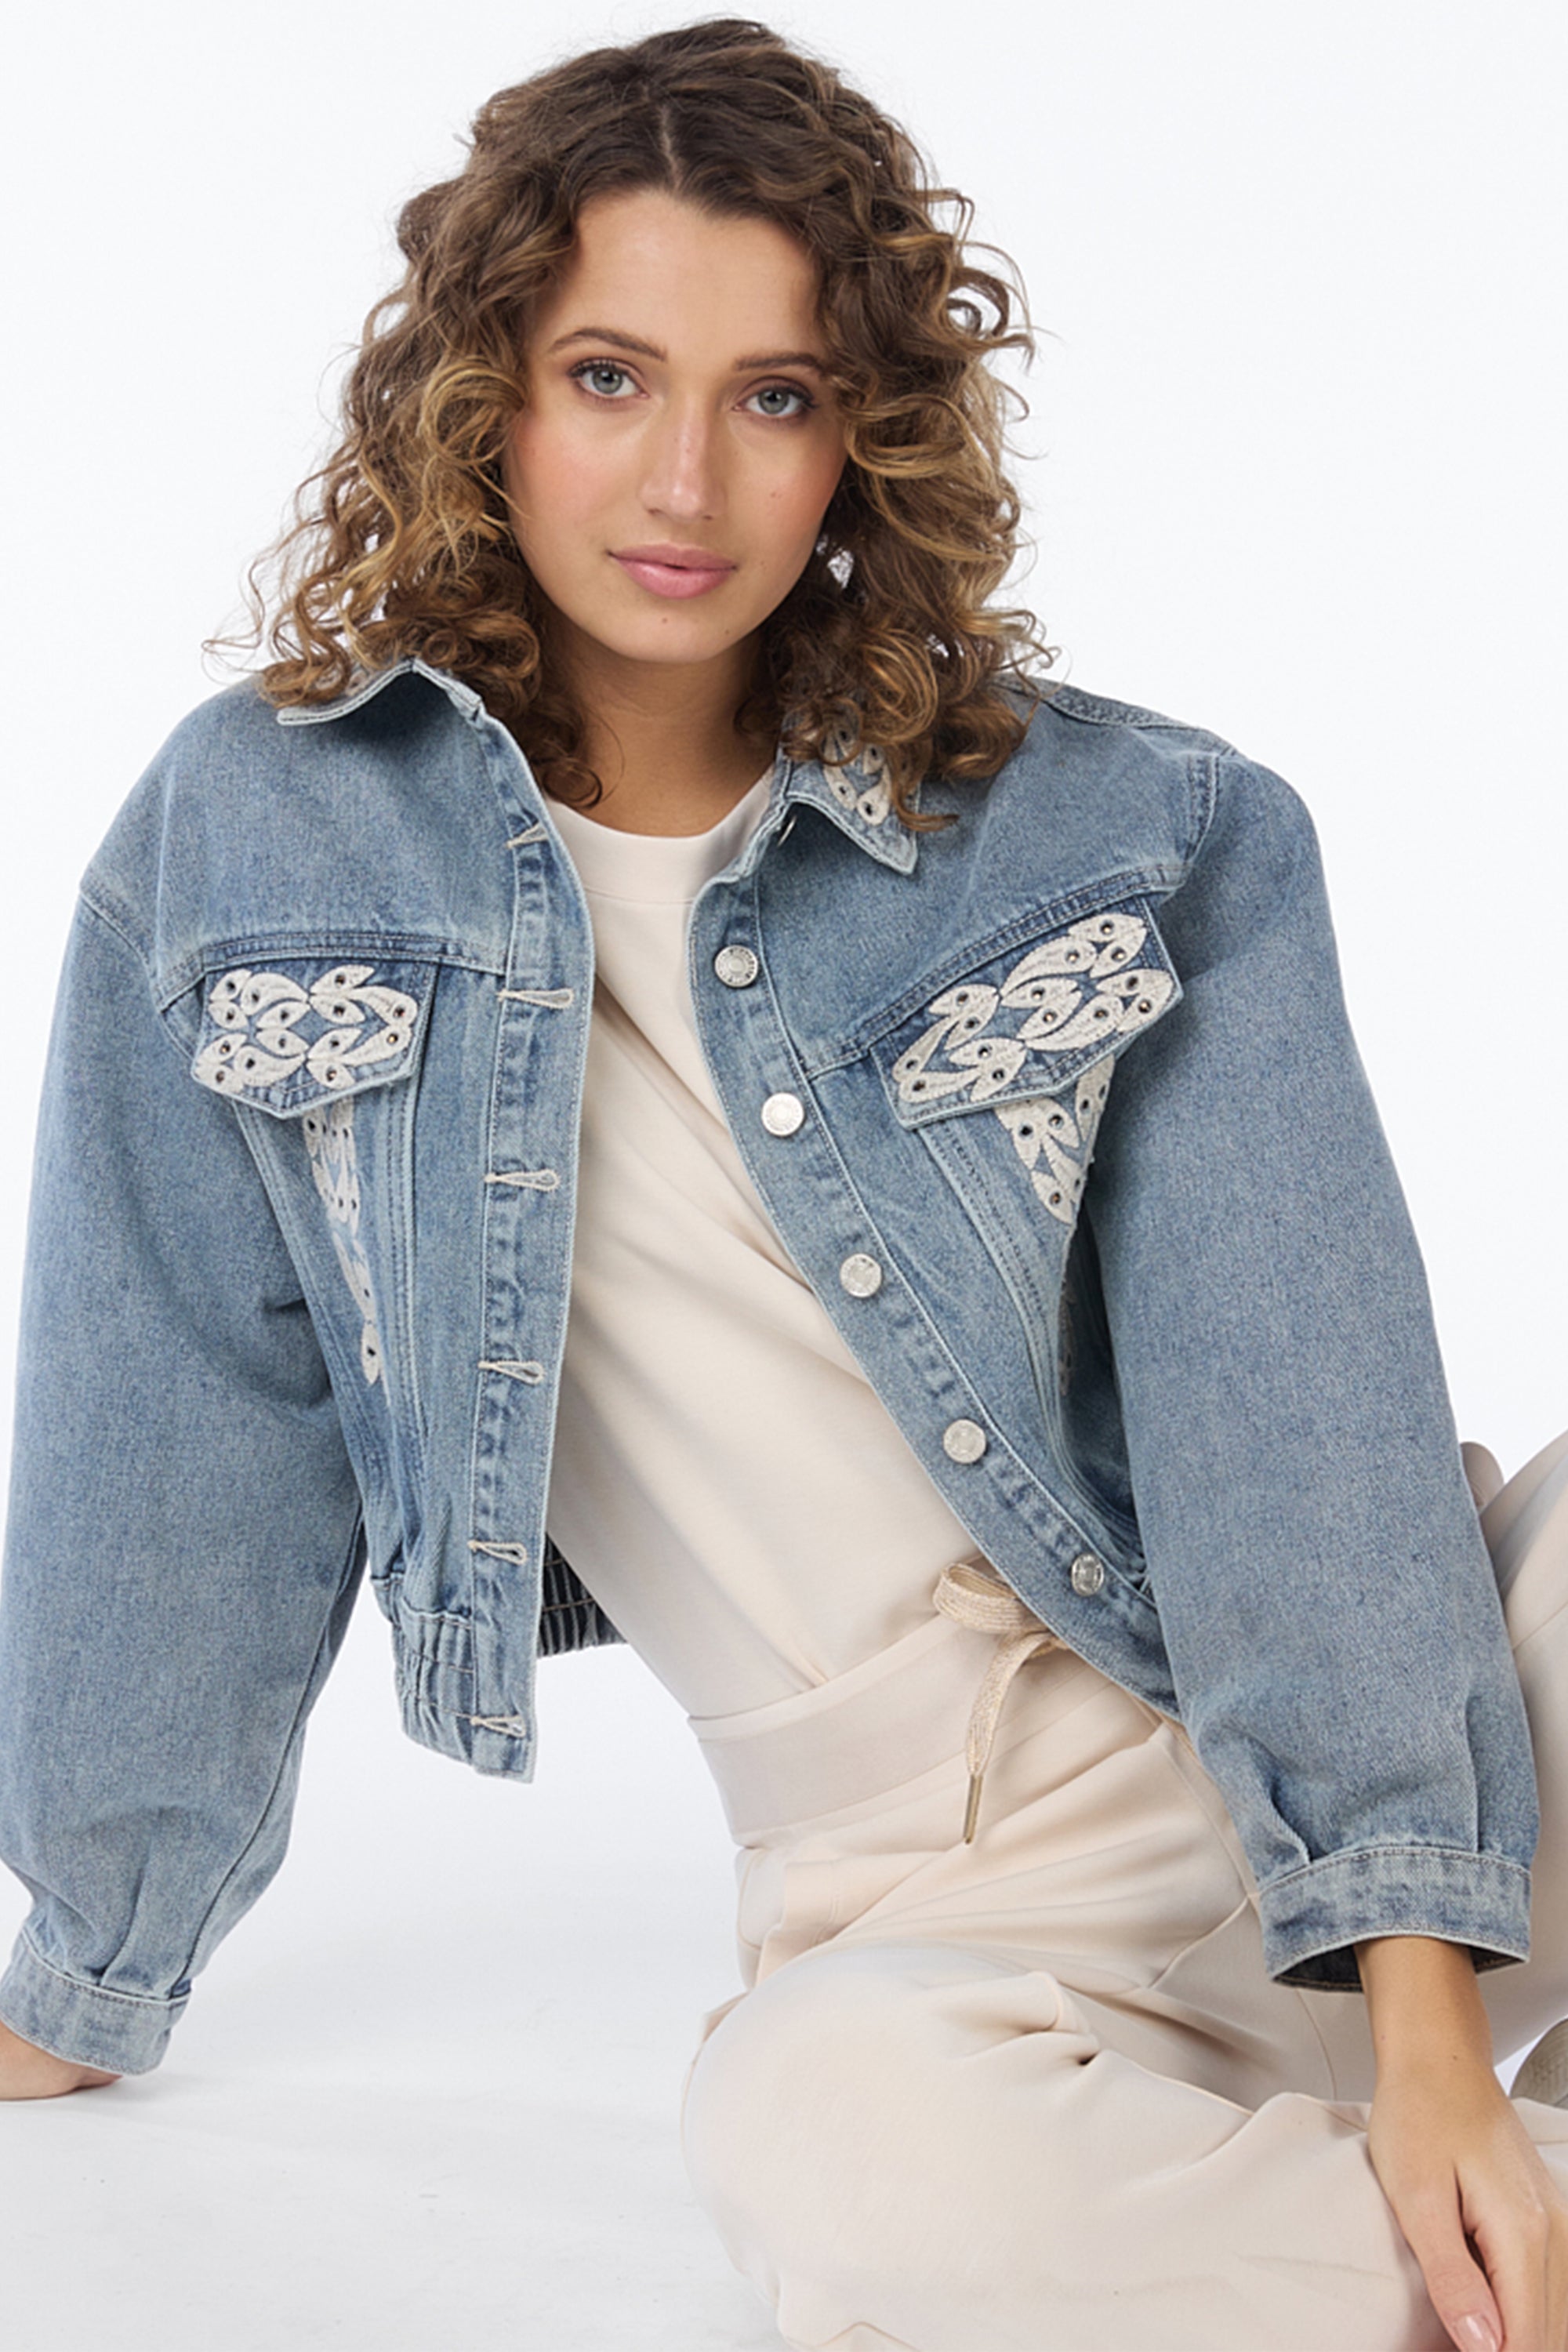 Front view of Esqualo (SP2412002) Women's Long Sleeve Cropped Blue Jean Jacket With Embroidery & Rhinestones on Collar and Front Panels